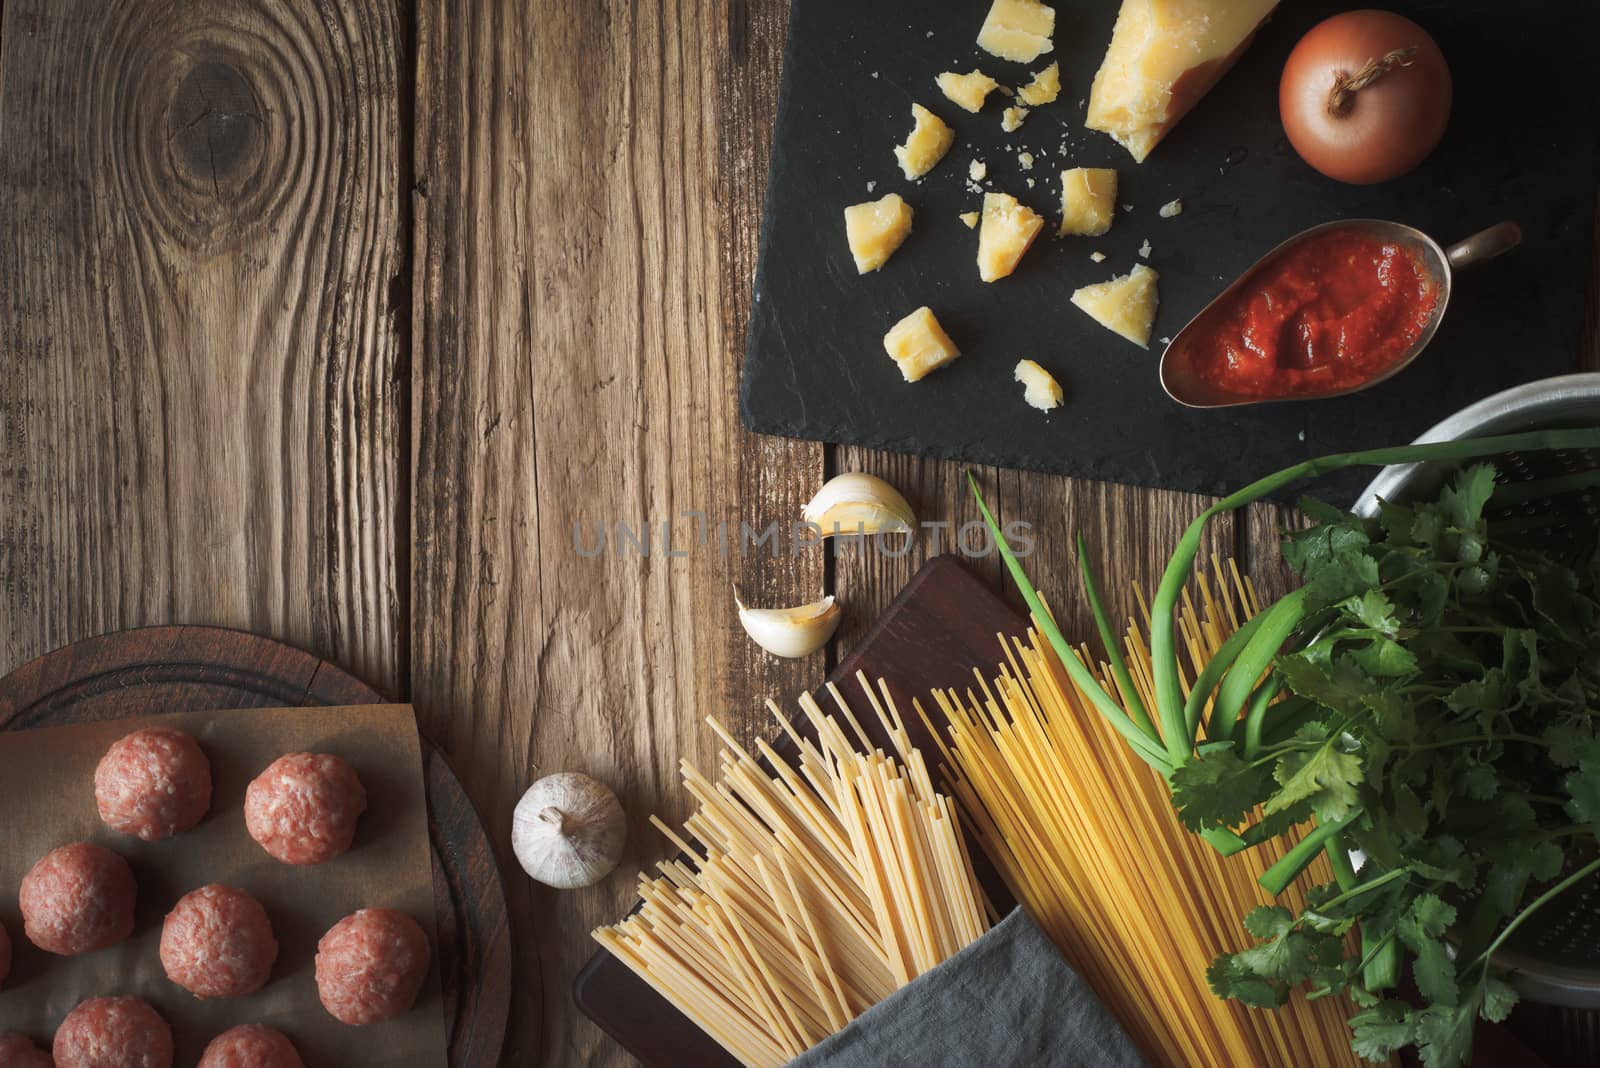 Ingredients for cooking spaghetti, meatballs with cheese and fresh herbs on the table horizontal copy space